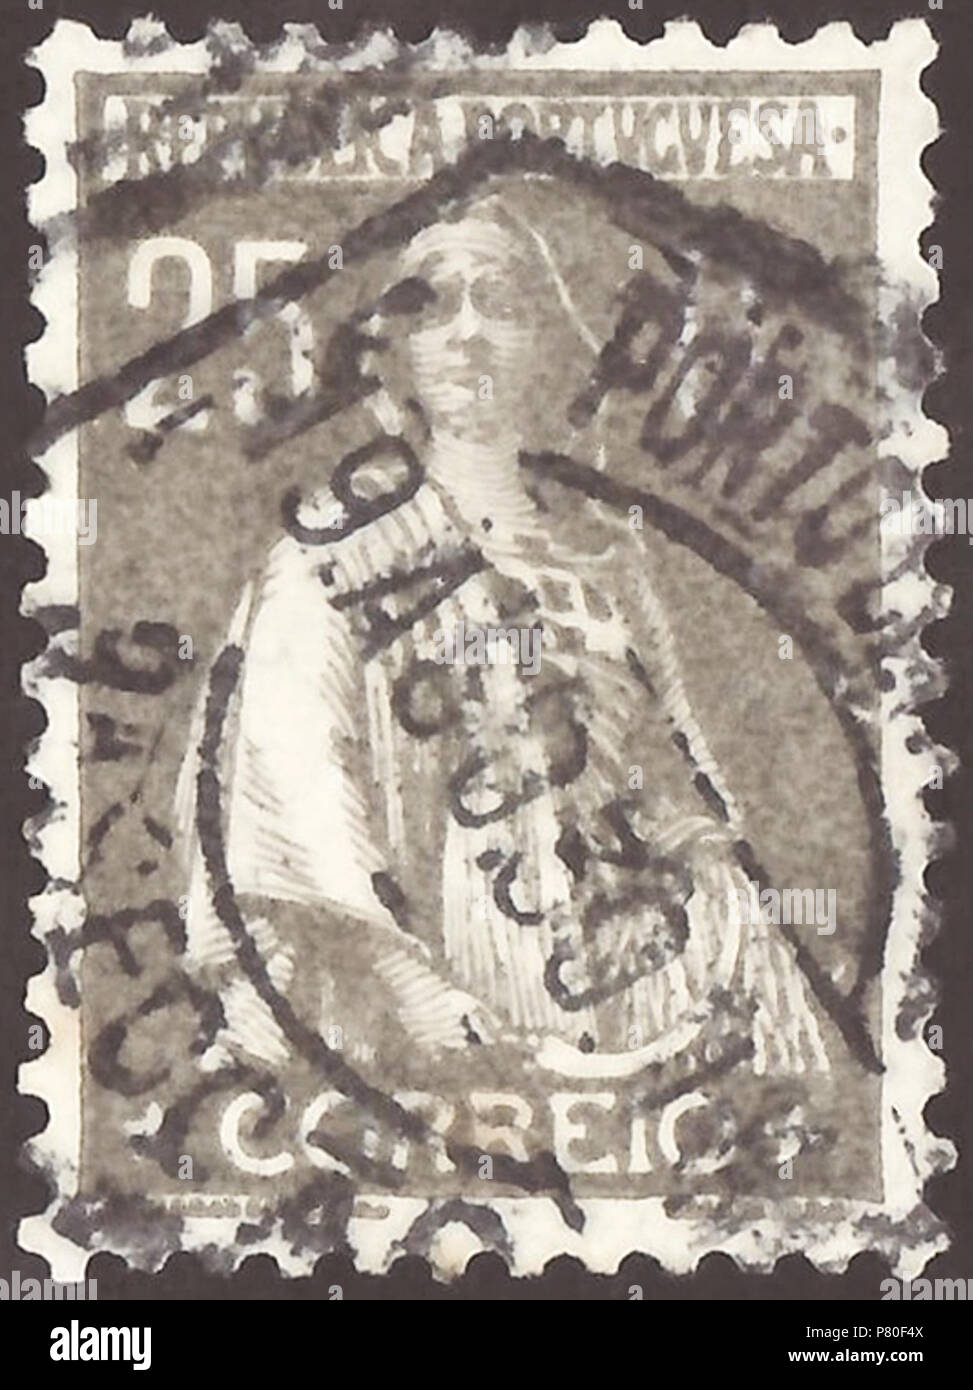 Stamp of Portugal; 1926; definitive stamp of the issue 'Ceres - 1st London issue'; new values and colors after the military coup in Portugal, 1926, printed in London (printery 'Thomas De La Rue & Company, Limited') according to the former design template; stamp postmarked in 1930 Stamp: Michel: No. 414; Yvert et Tellier: No. 422 Color: grey on normal paper Watermark: none Nominal value: 25 C. (Centavos) Postage validity: from 2 December 1926 until 30 September 1945 Stamp picture size (printed area without names line): 17.5 x 25.0 mm . 2 December 1926 (first issue day of the stamp) 19 August 19 Stock Photo